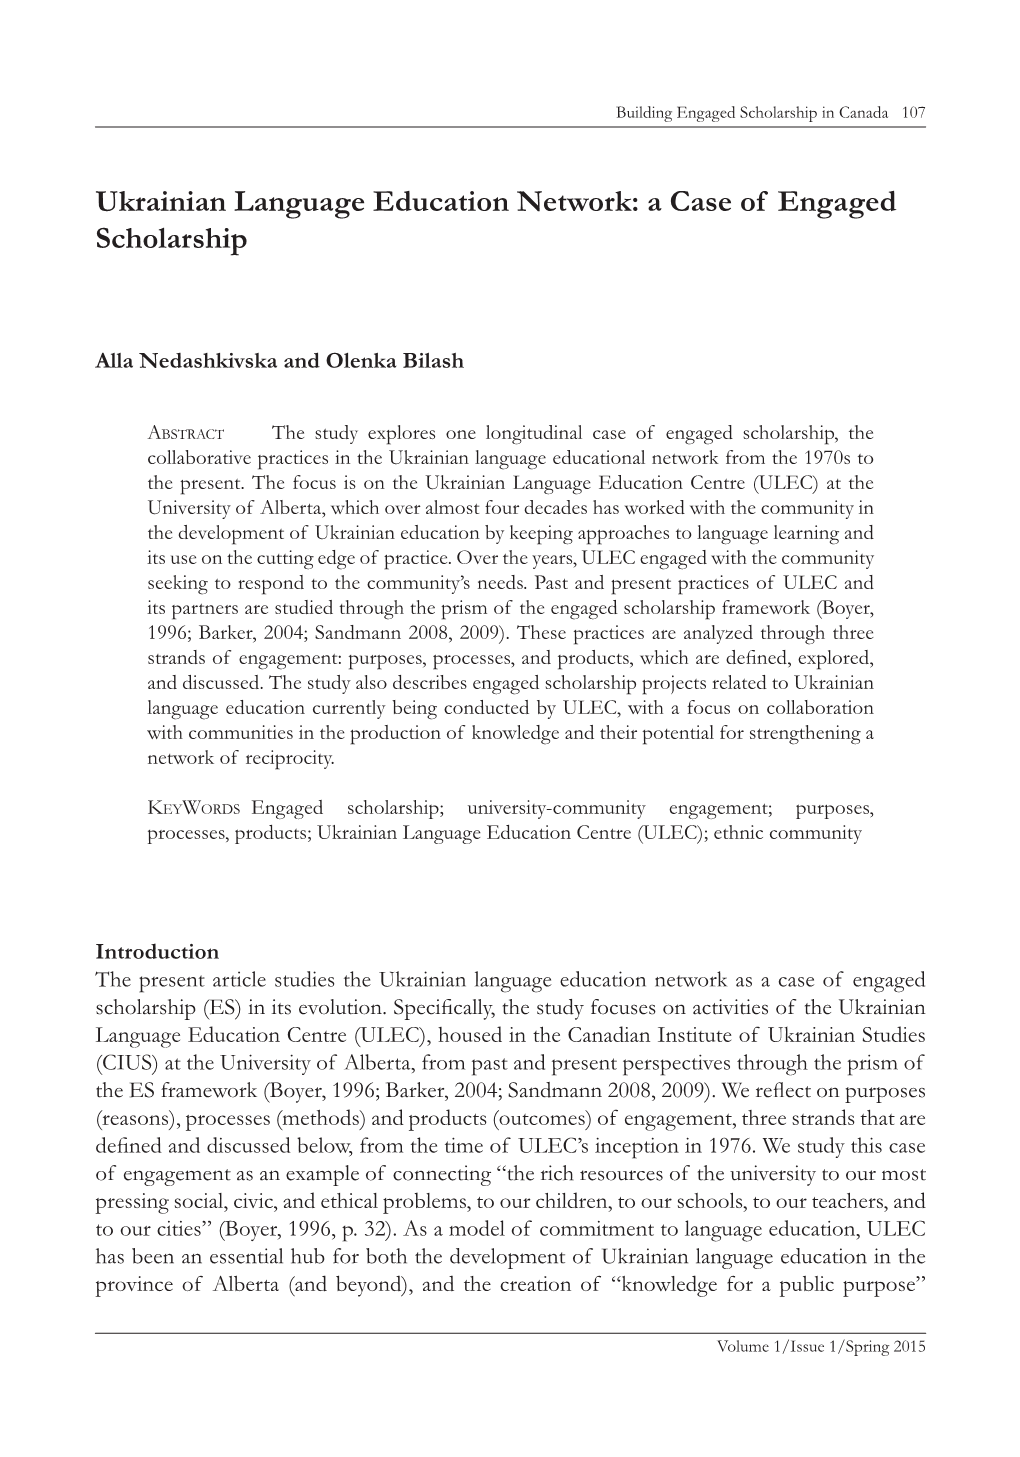 A Case of Engaged Scholarship